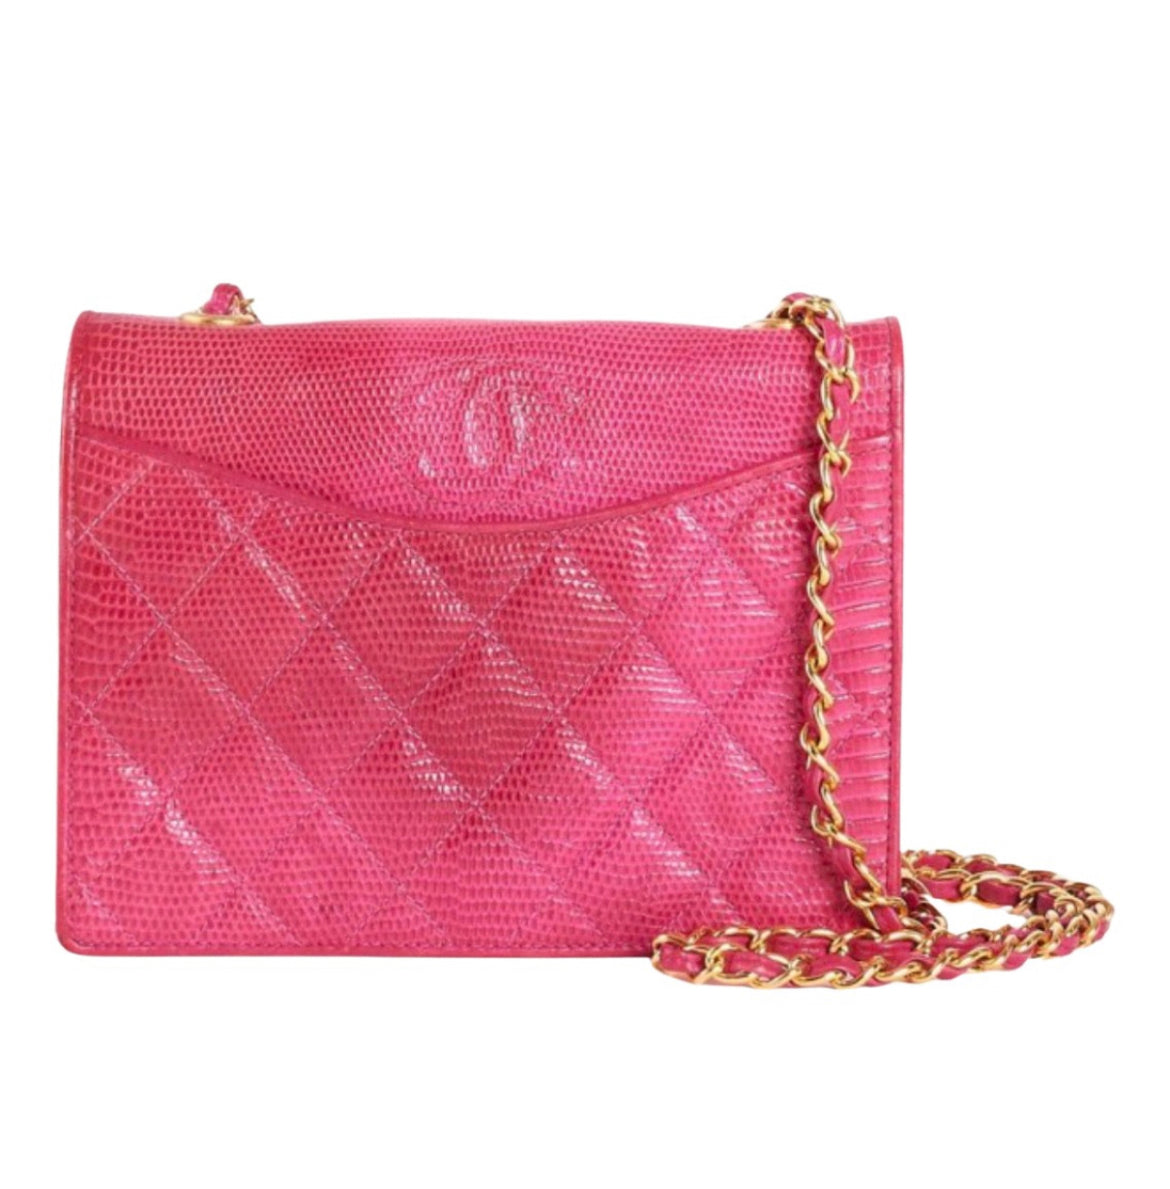  Chanel, Pre-Loved Pink Quilted Satin 'CC' Shoulder Bag Small,  Pink : Luxury Stores